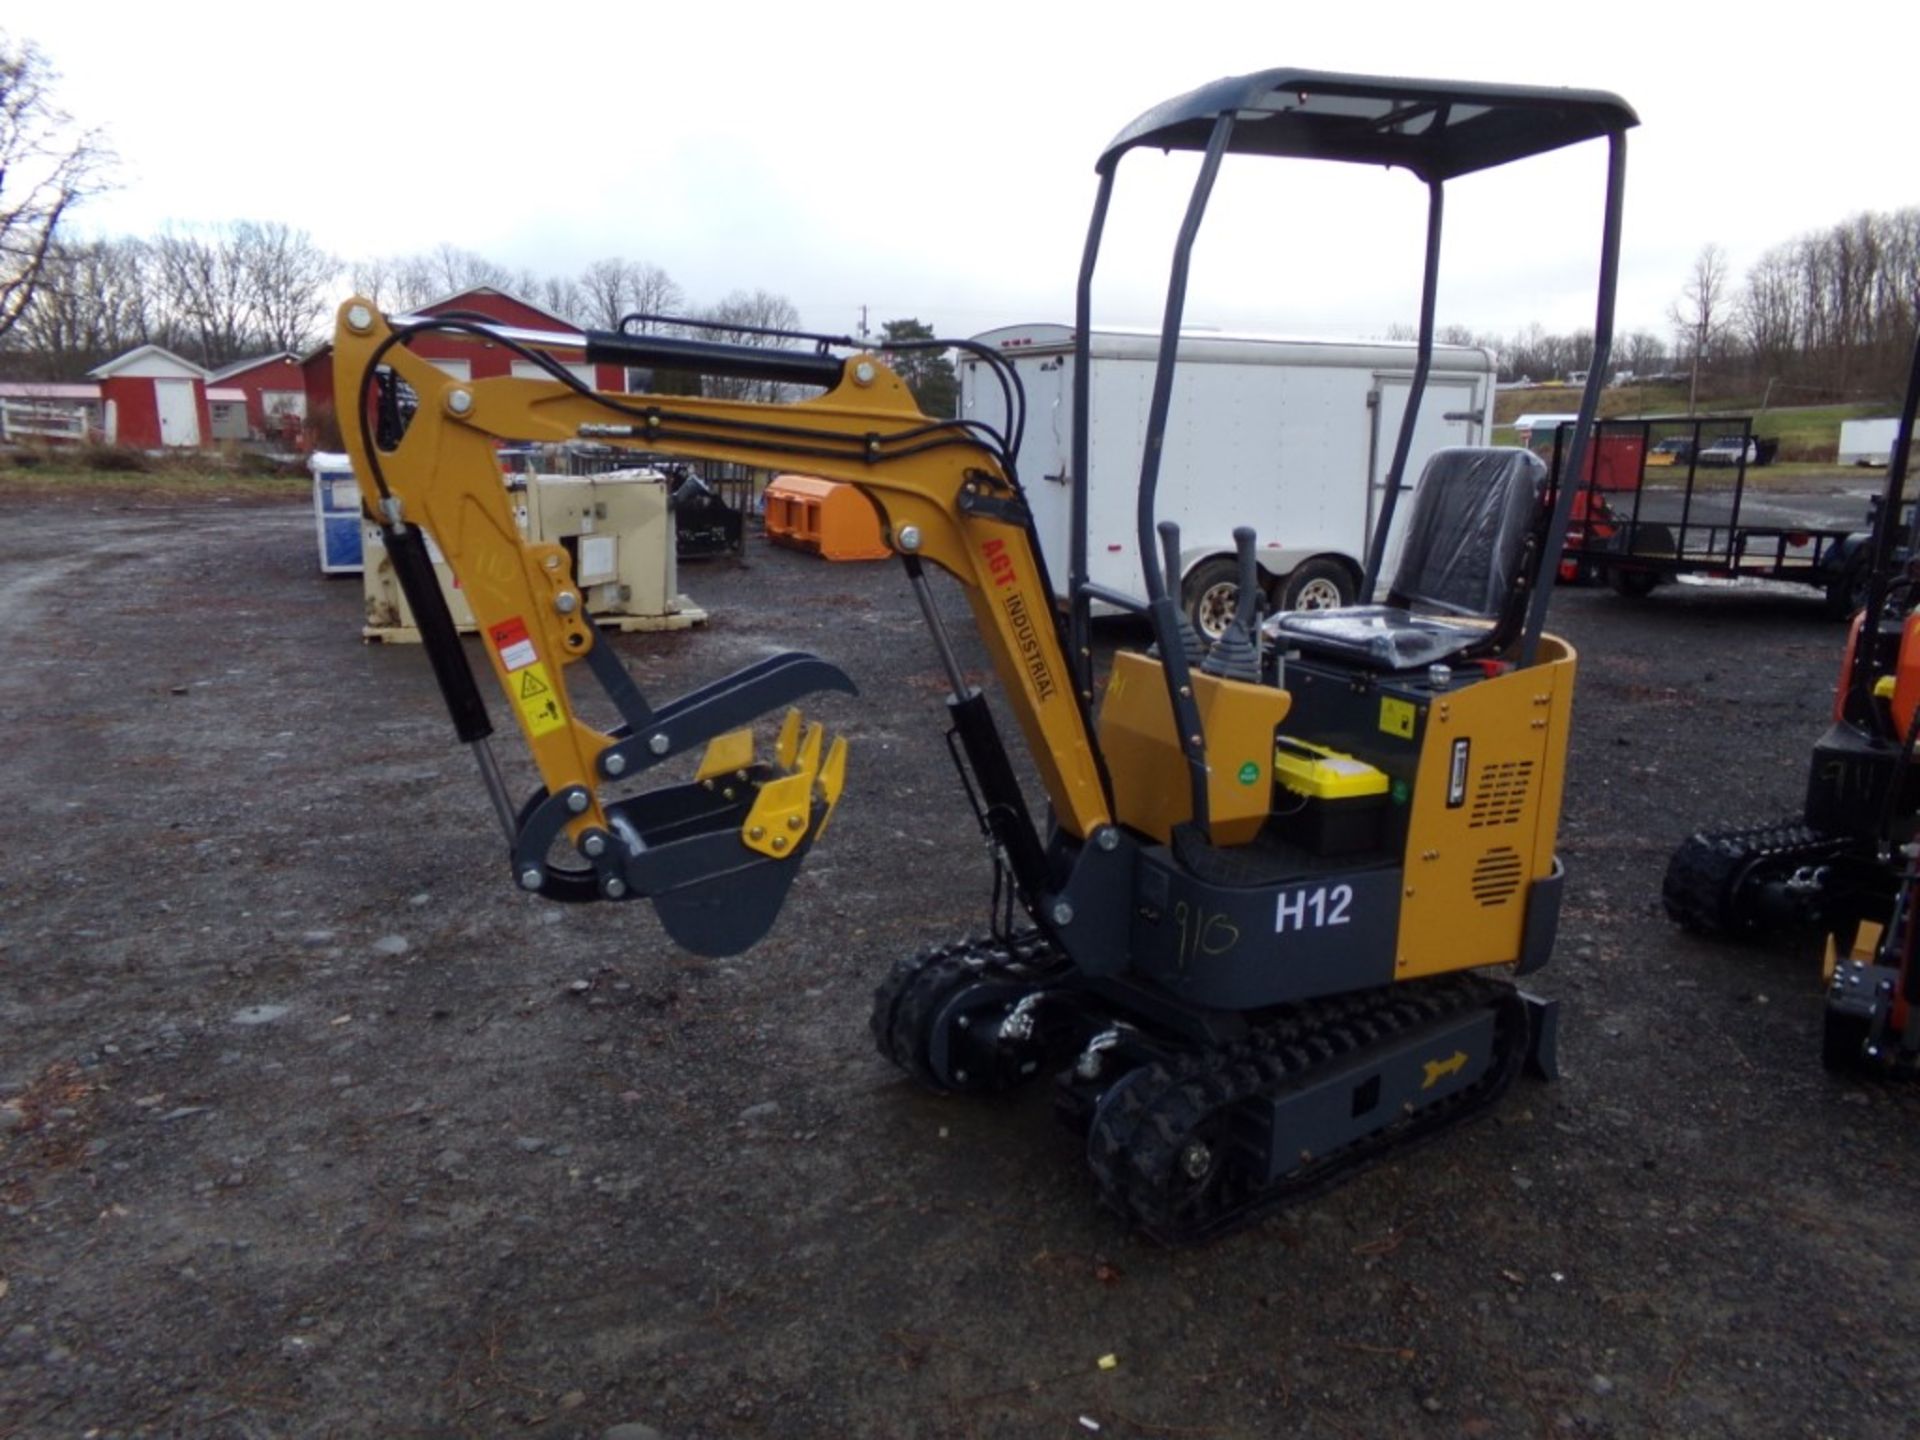 New AGT Industrial H12 Mini Excavator with Grader Blade, Stationary Thumb, Briggs Gas Engine, CAT